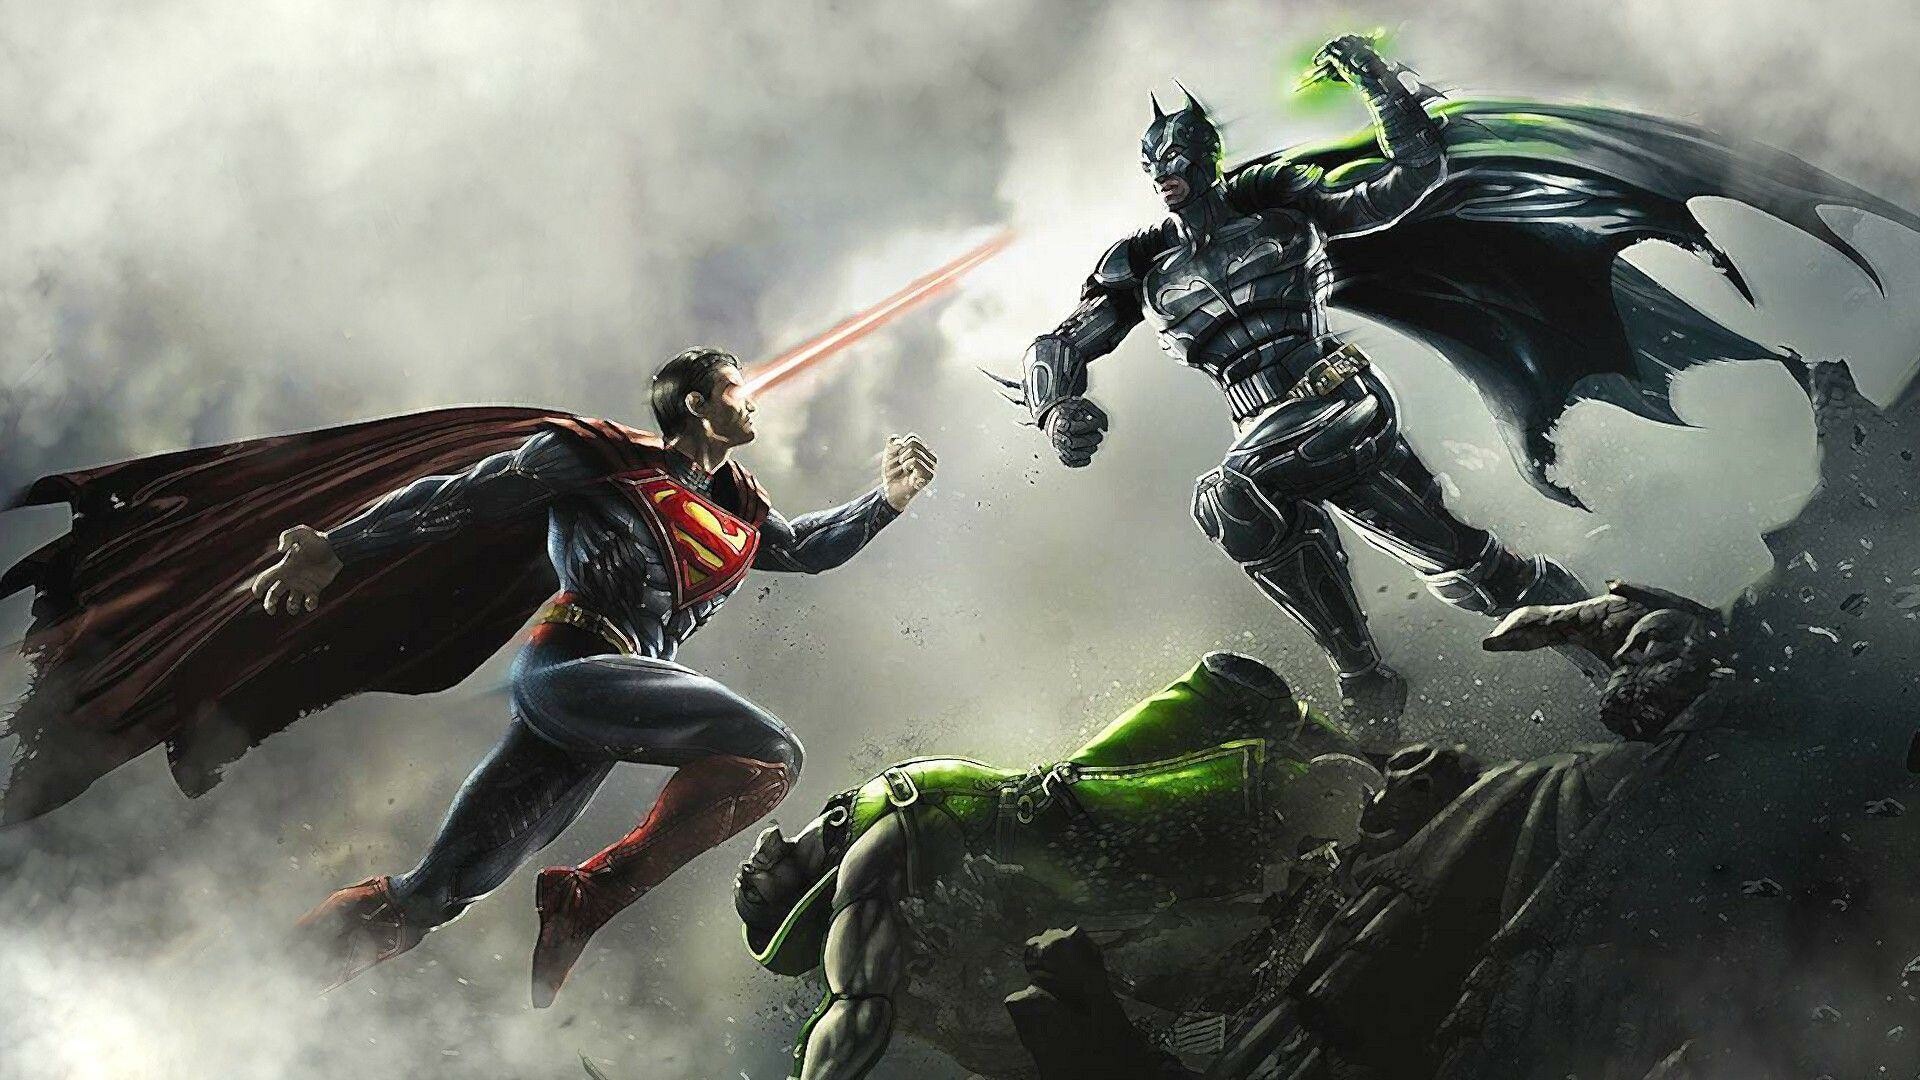 Injustice: The twisted superhero universe, A new branch of the DC multiverse, Action-adventure game. 1920x1080 Full HD Wallpaper.